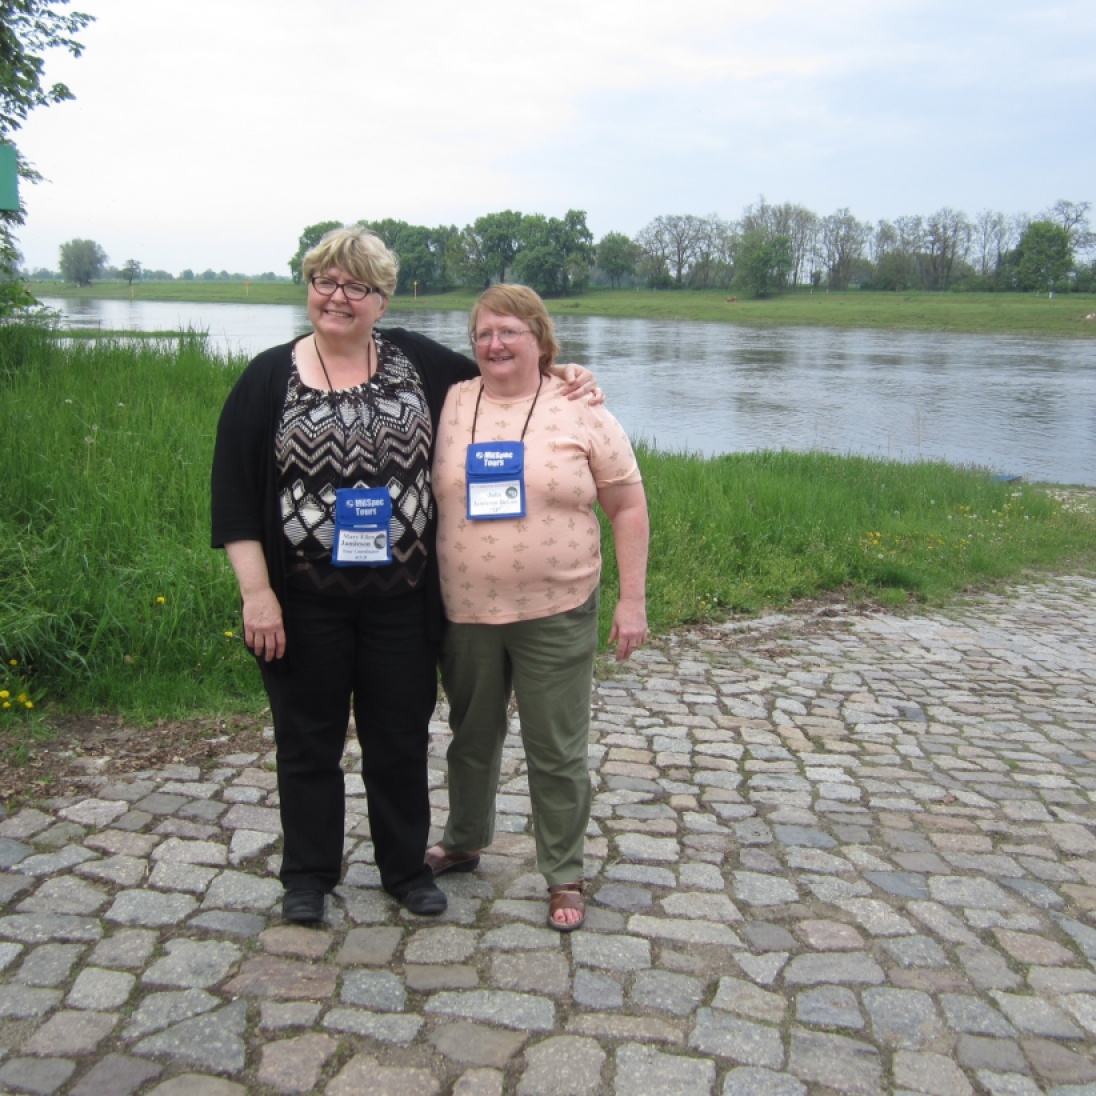 Mary and Julia at the Elbe River crossing (not the Mulde).